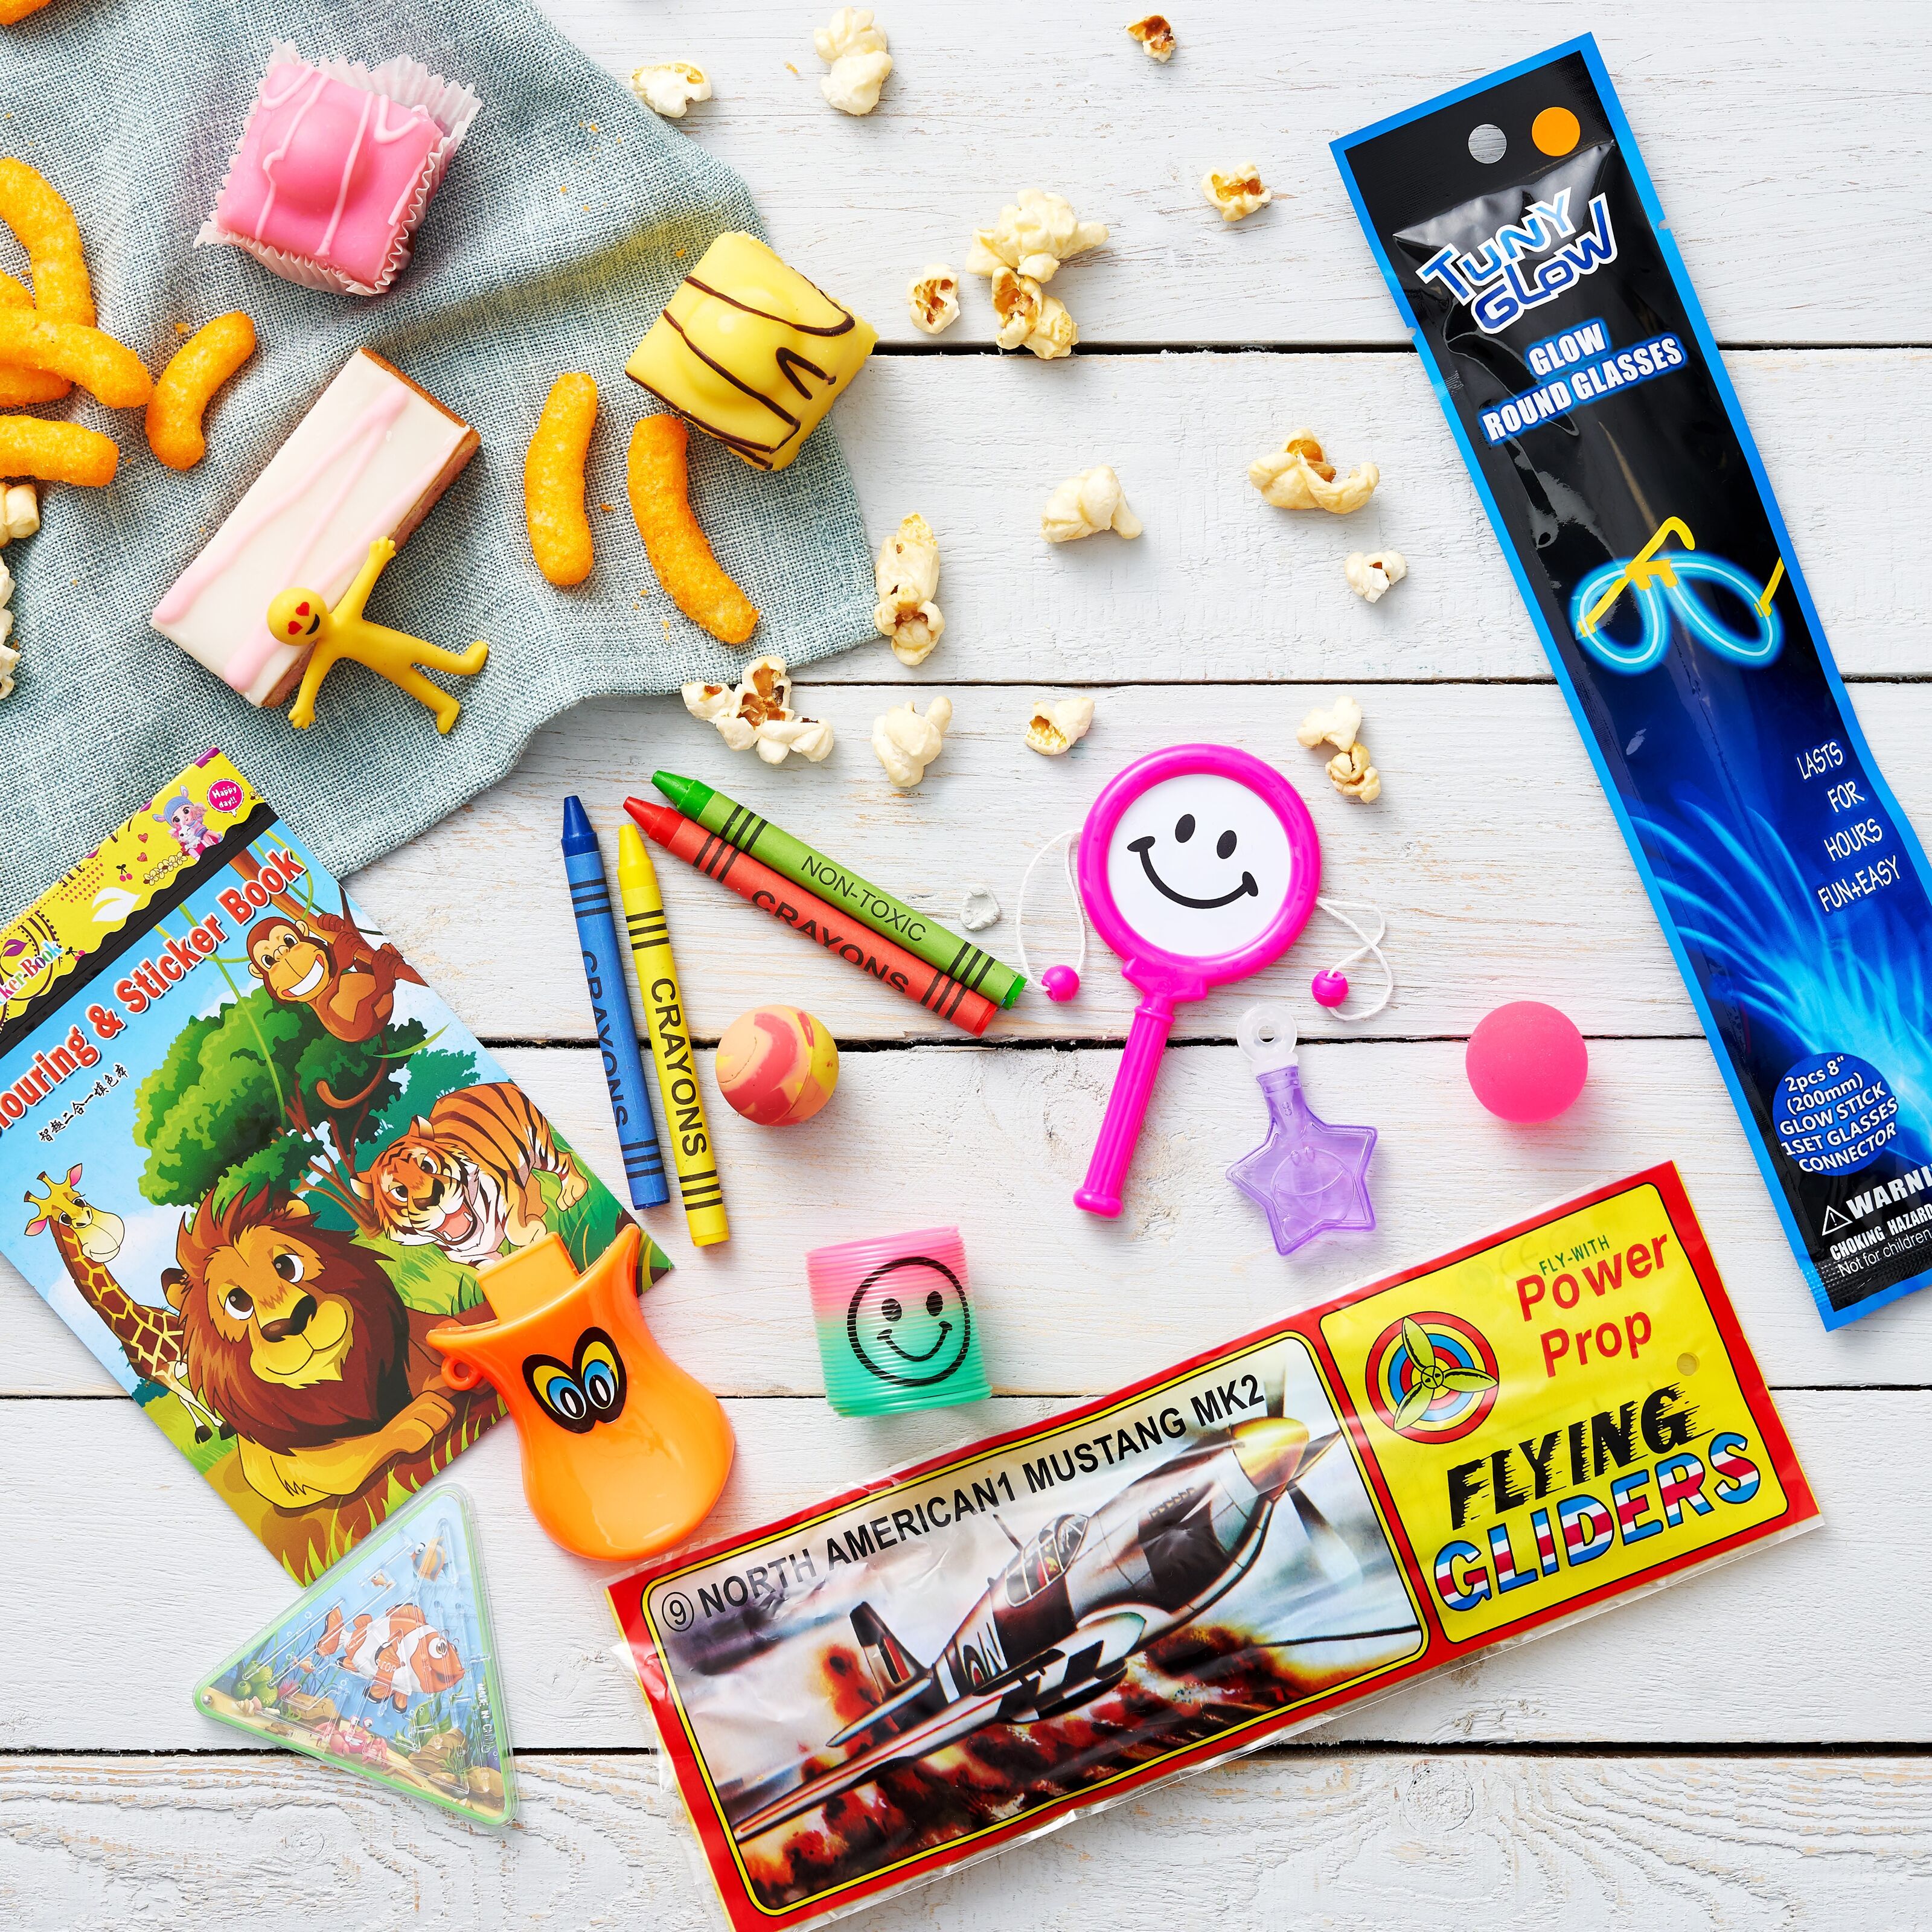 THE TWIDDLERS - 120 Party Bag Fillers for Kids, Huge Assortment of Toys for  Boys and Girls, Perfect for Birthday Pinata, Stocking Cracker Fillers